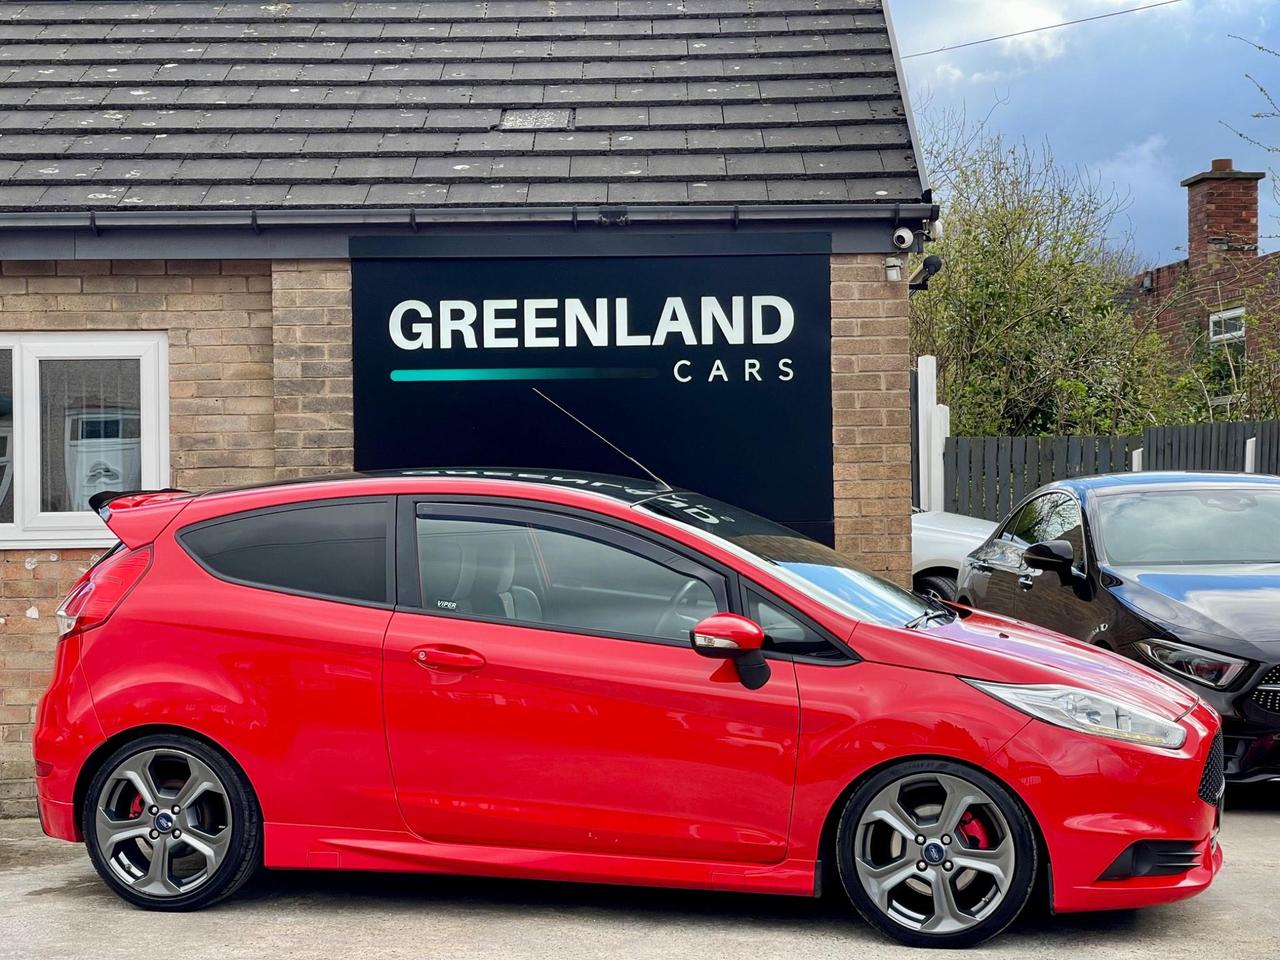 Used 2015 Ford Fiesta for sale in Sheffield